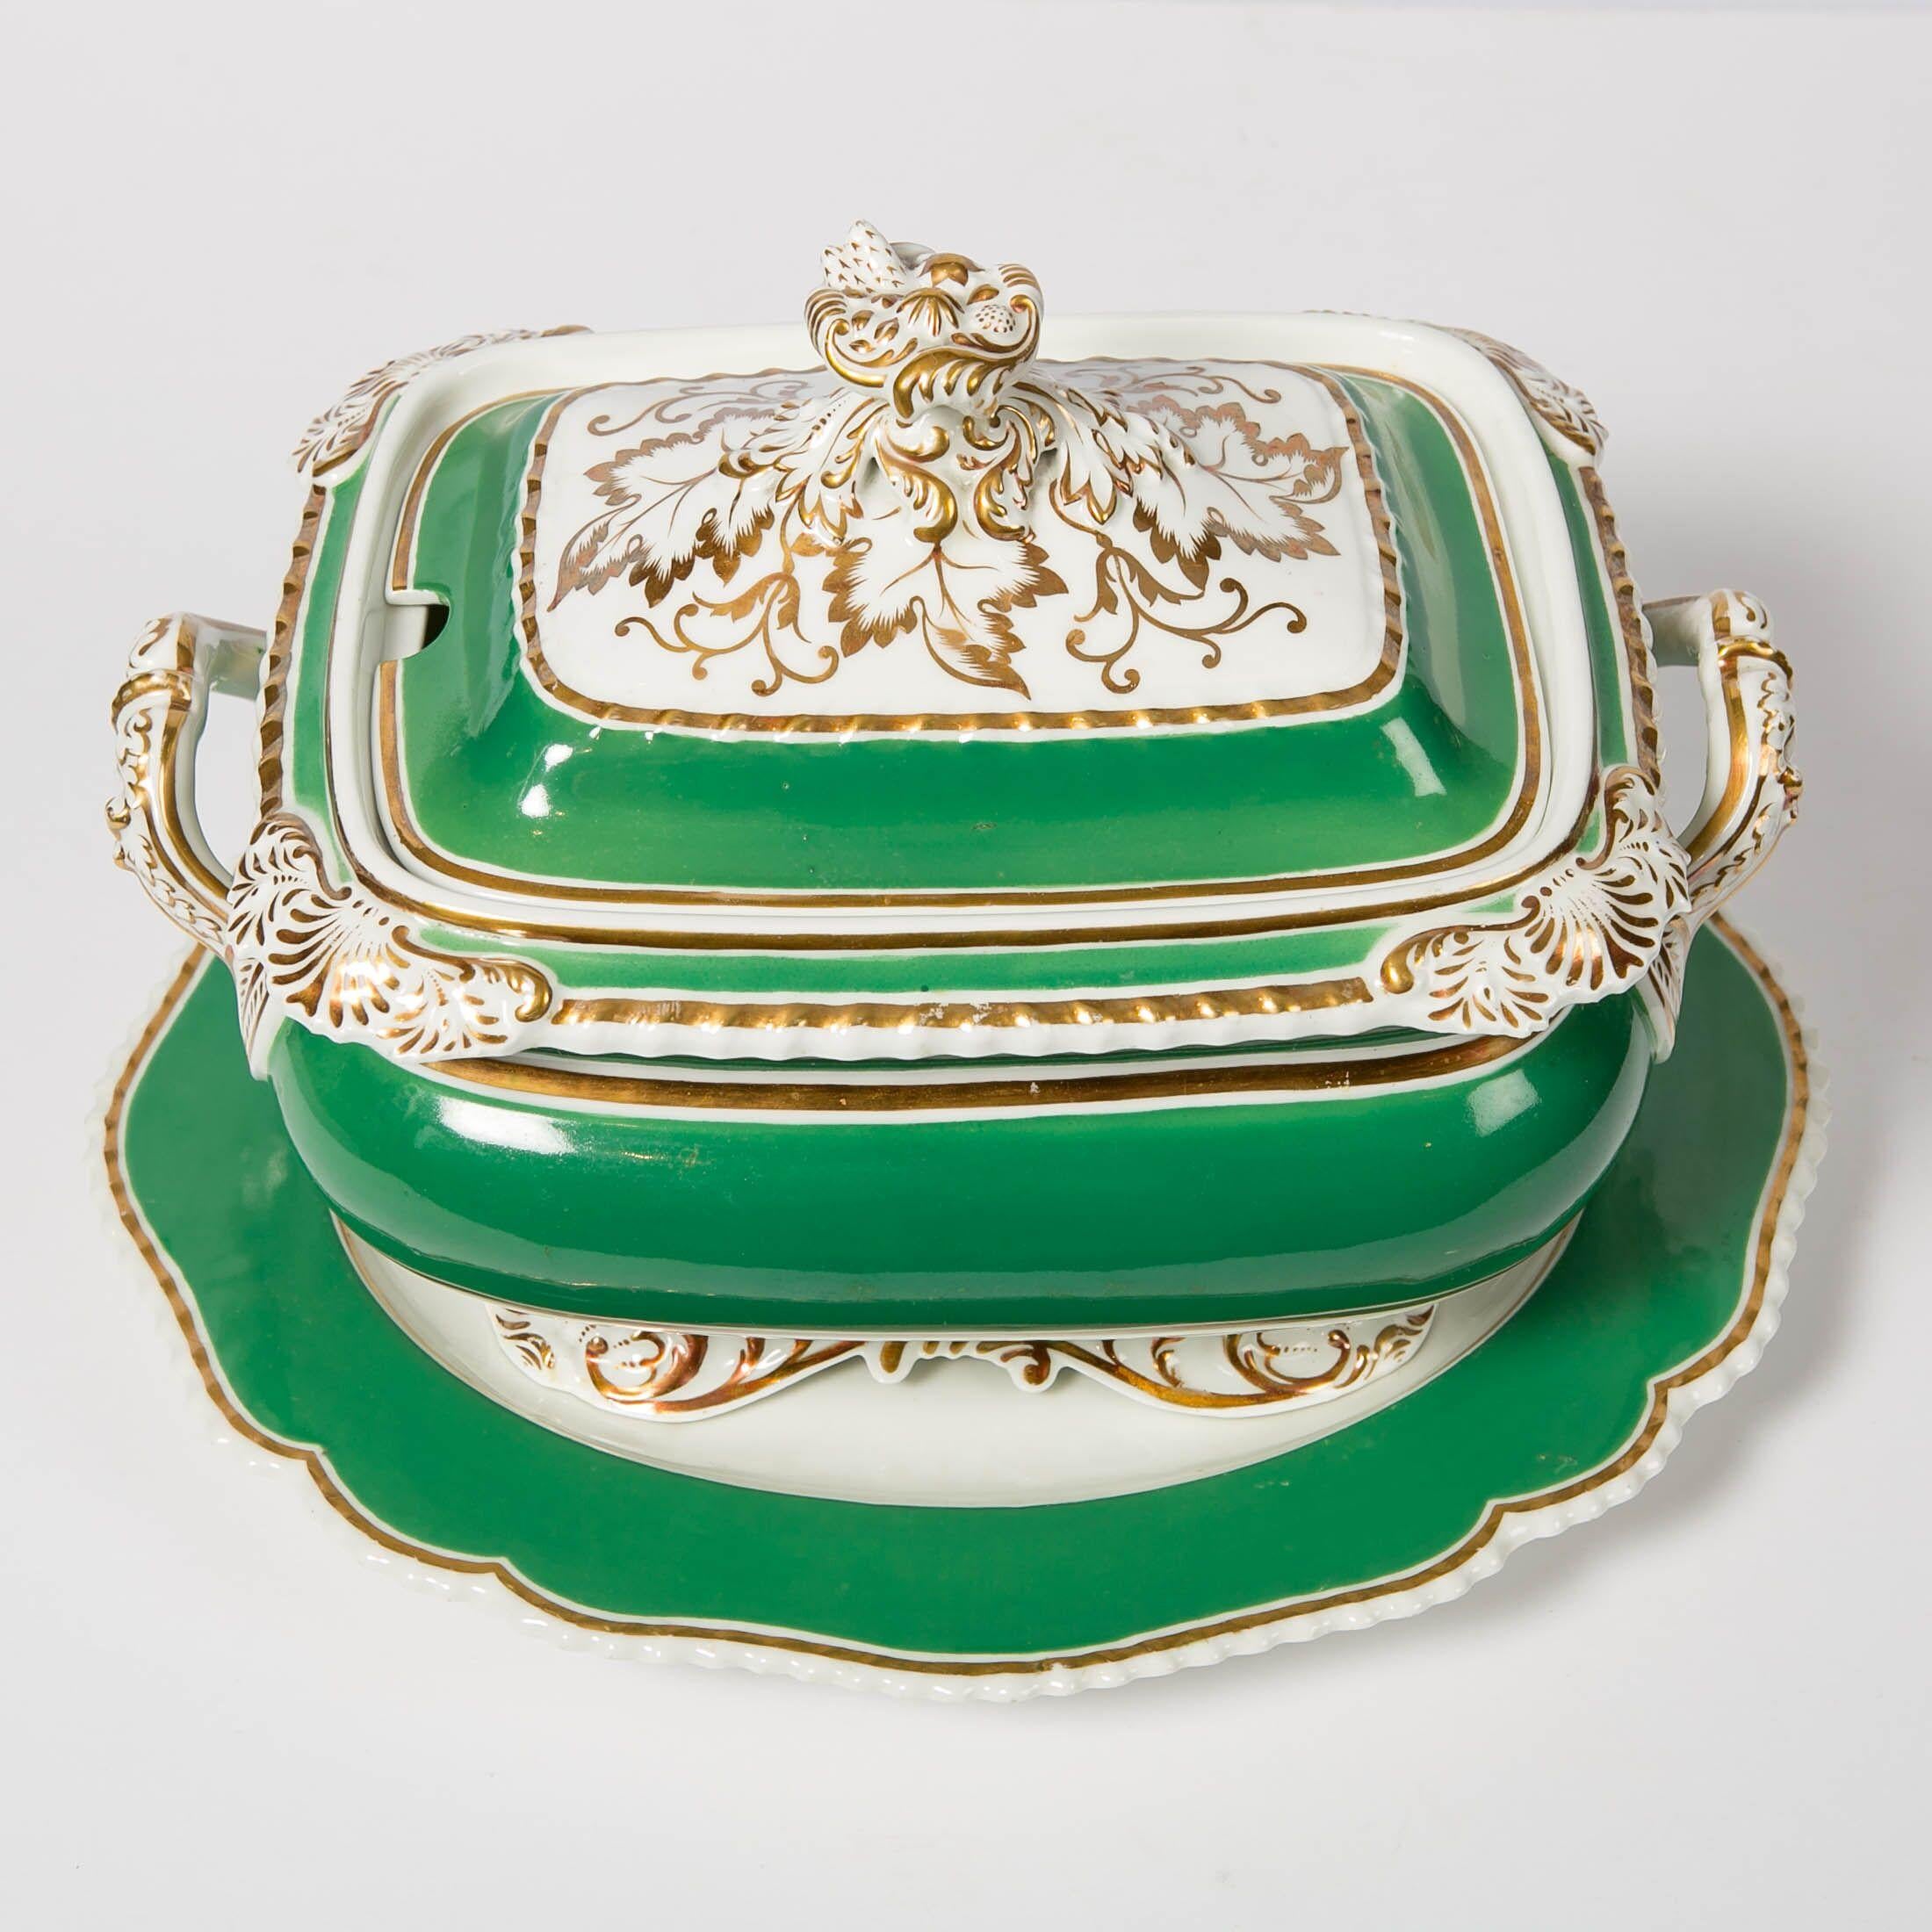 Porcelain Chamberlains Worcester Green Soup Tureen Made in England, circa 1825